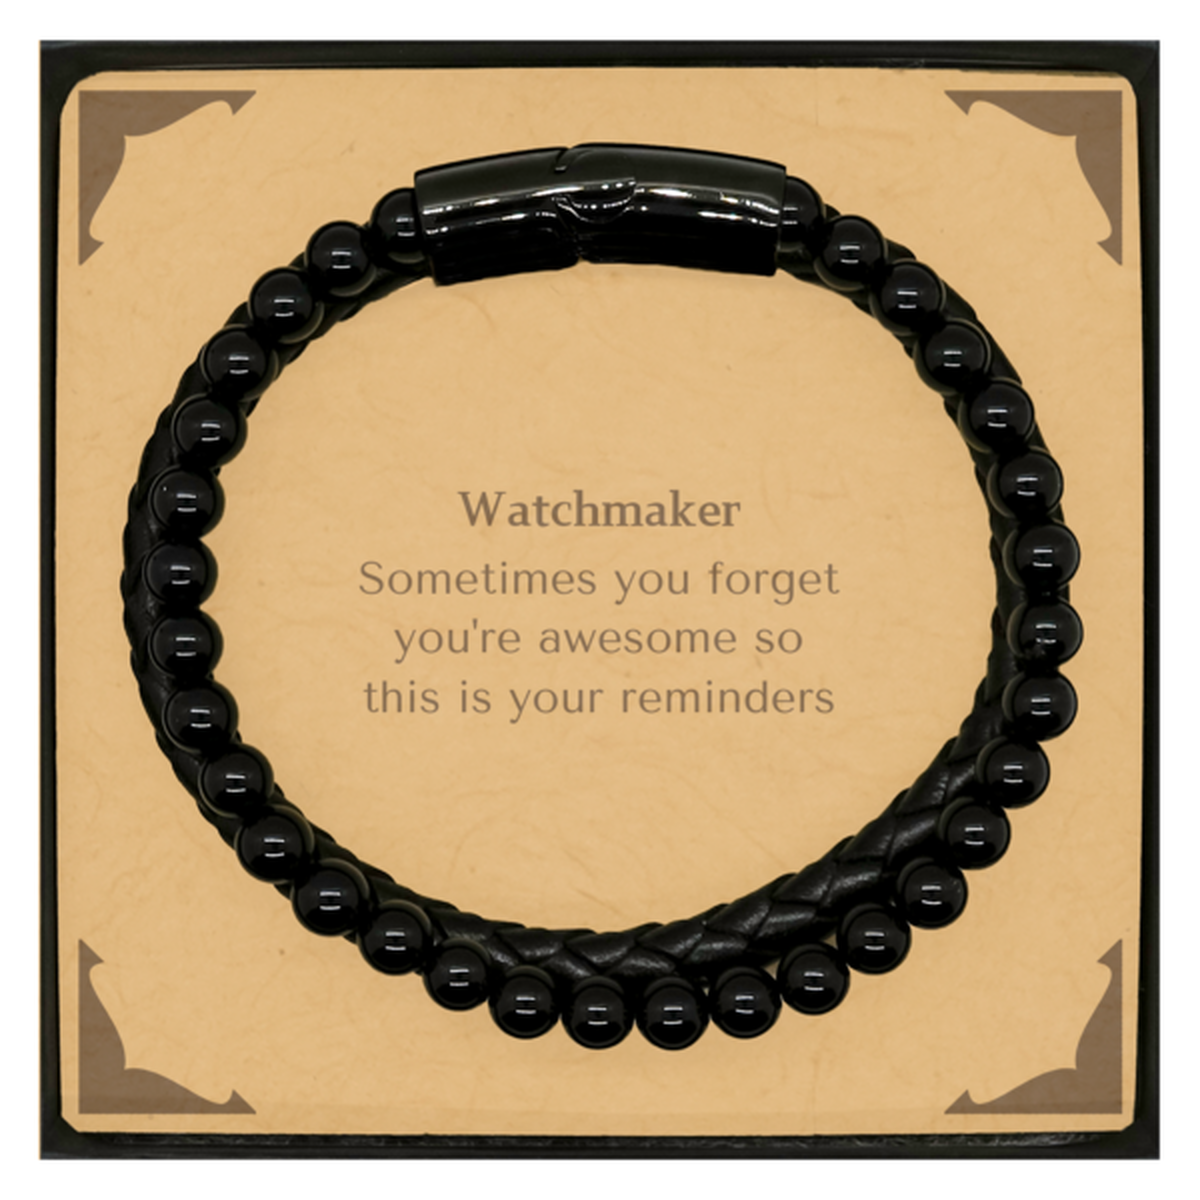 Sentimental Watchmaker Stone Leather Bracelets, Watchmaker Sometimes you forget you're awesome so this is your reminders, Graduation Christmas Birthday Gifts for Watchmaker, Men, Women, Coworkers